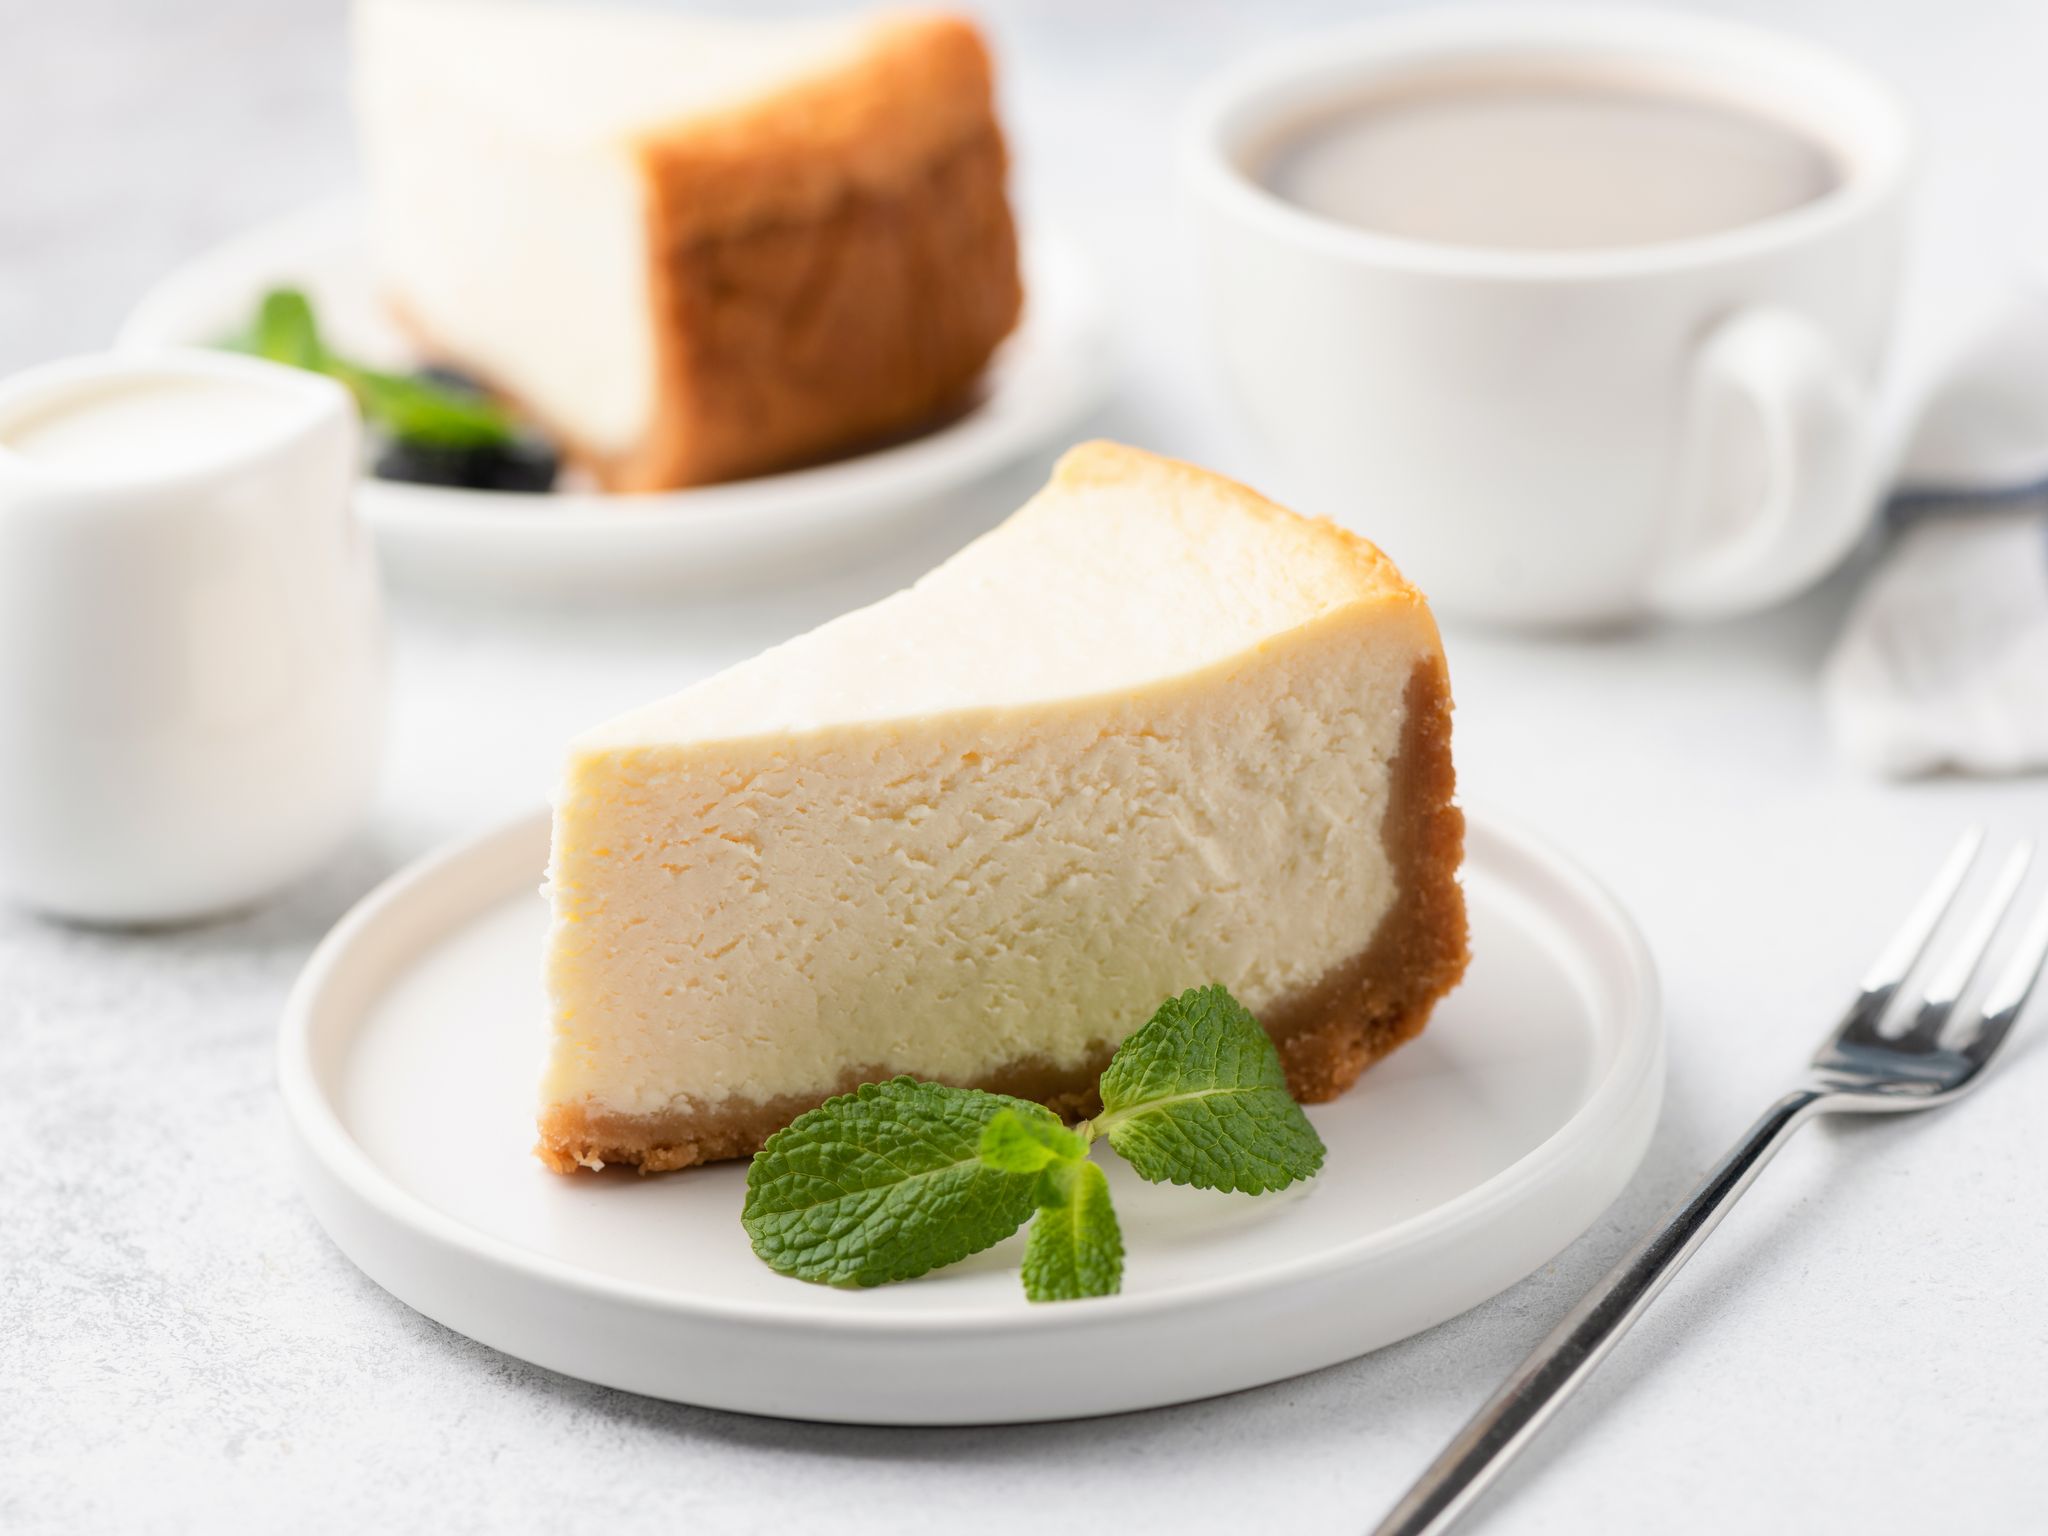 Cheesecake Au Fromage Blanc Inratable Au Monsieur Cuisine Recette De Cheesecake Au Fromage 